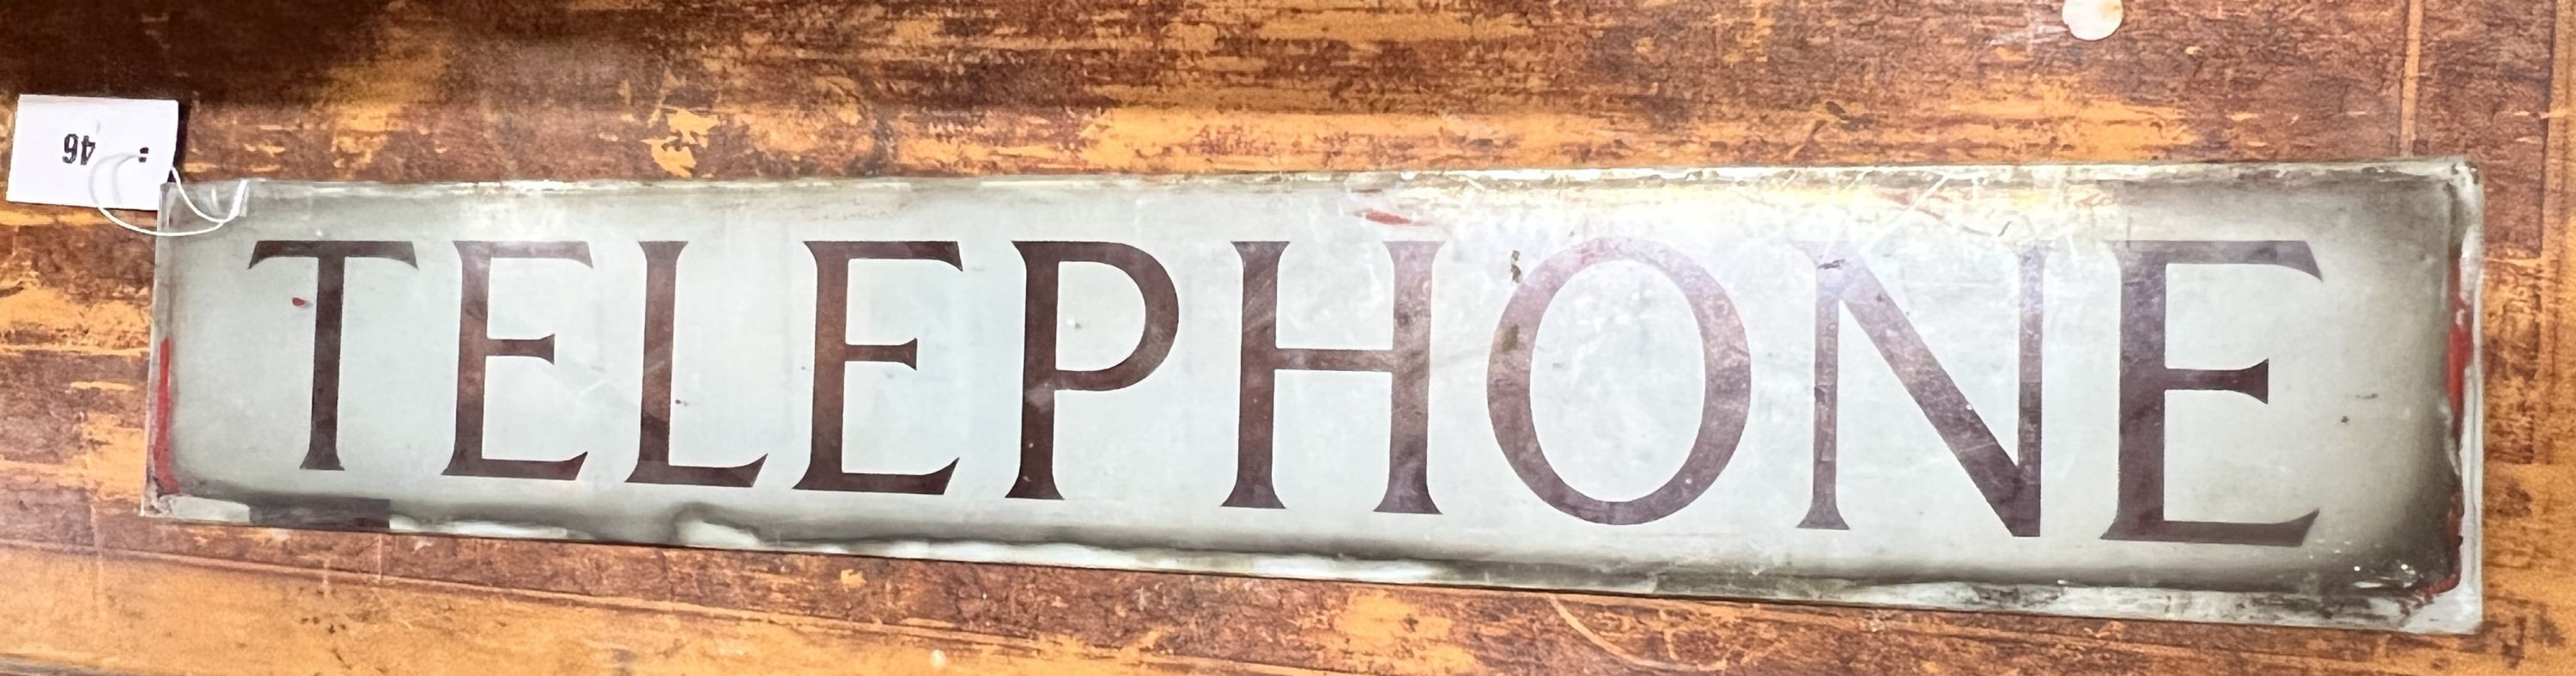 A vintage glass telephone box sign, width 64cm, height 10cm                                                                                                                                                                 